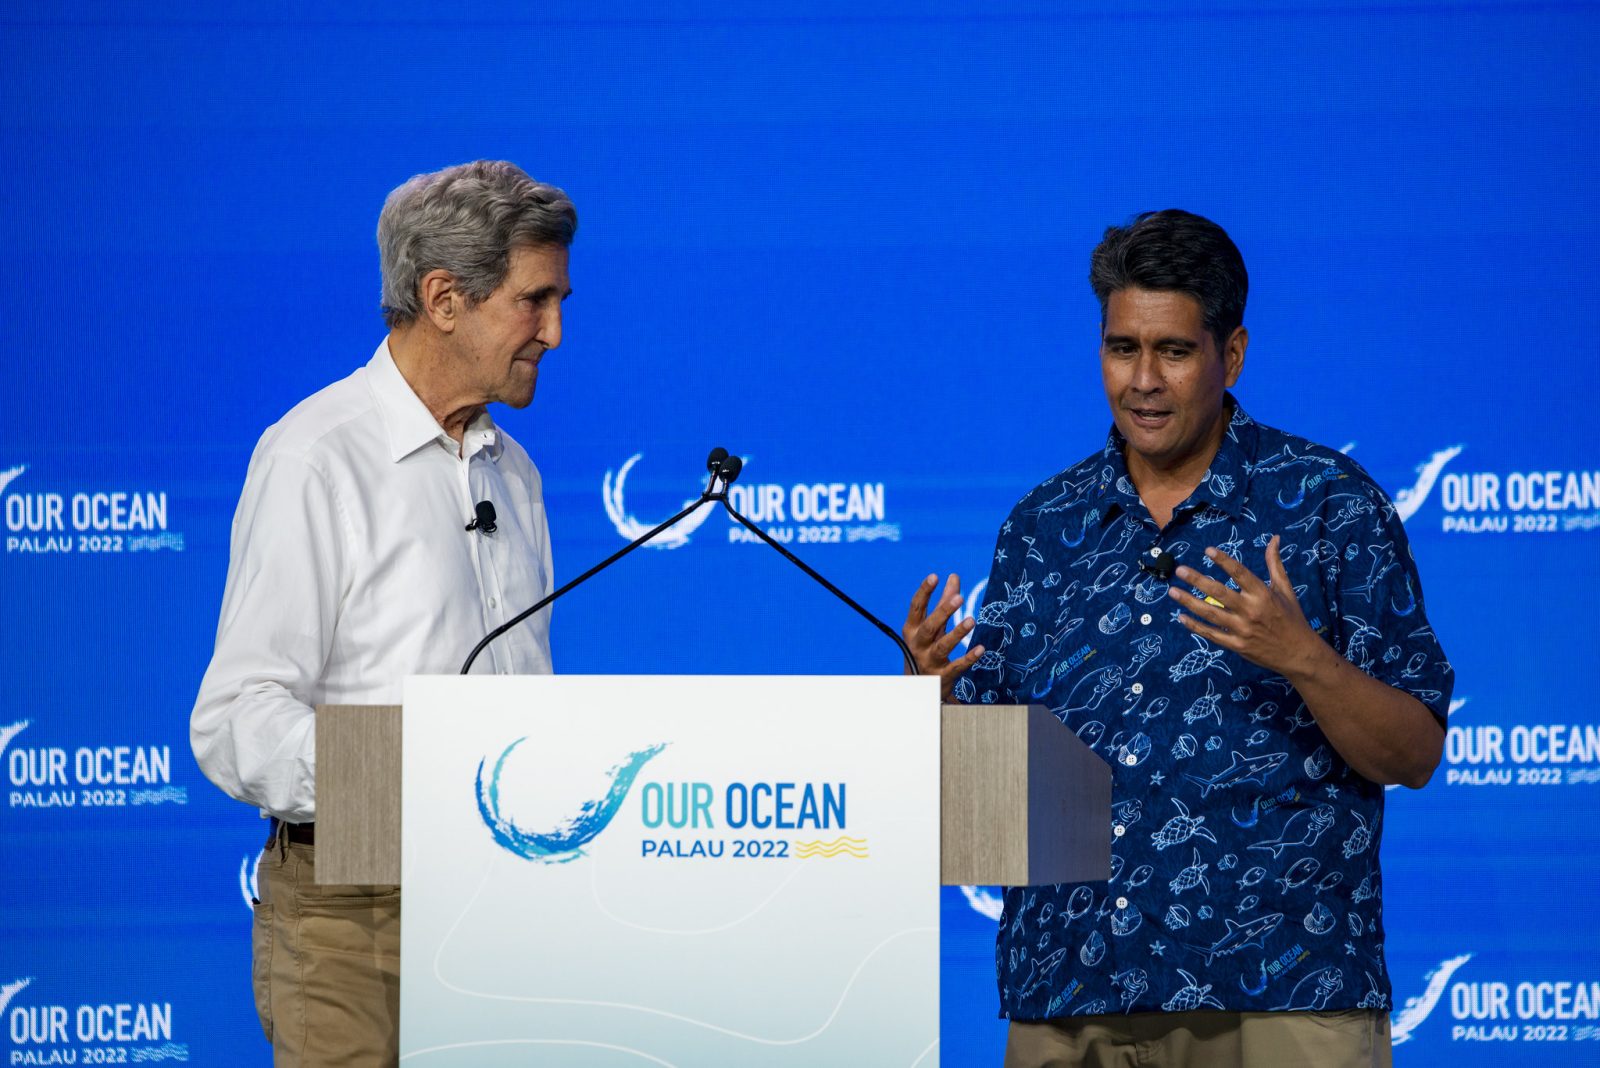 U.S. Special Presidential Envoy for Climate John Kerry (left) and Palau President Surangel Whipps Jr., at the 2022 Our Oceans conference in Palau. (Jesse Alpert/U.S. Department of State/Republic of Palau)